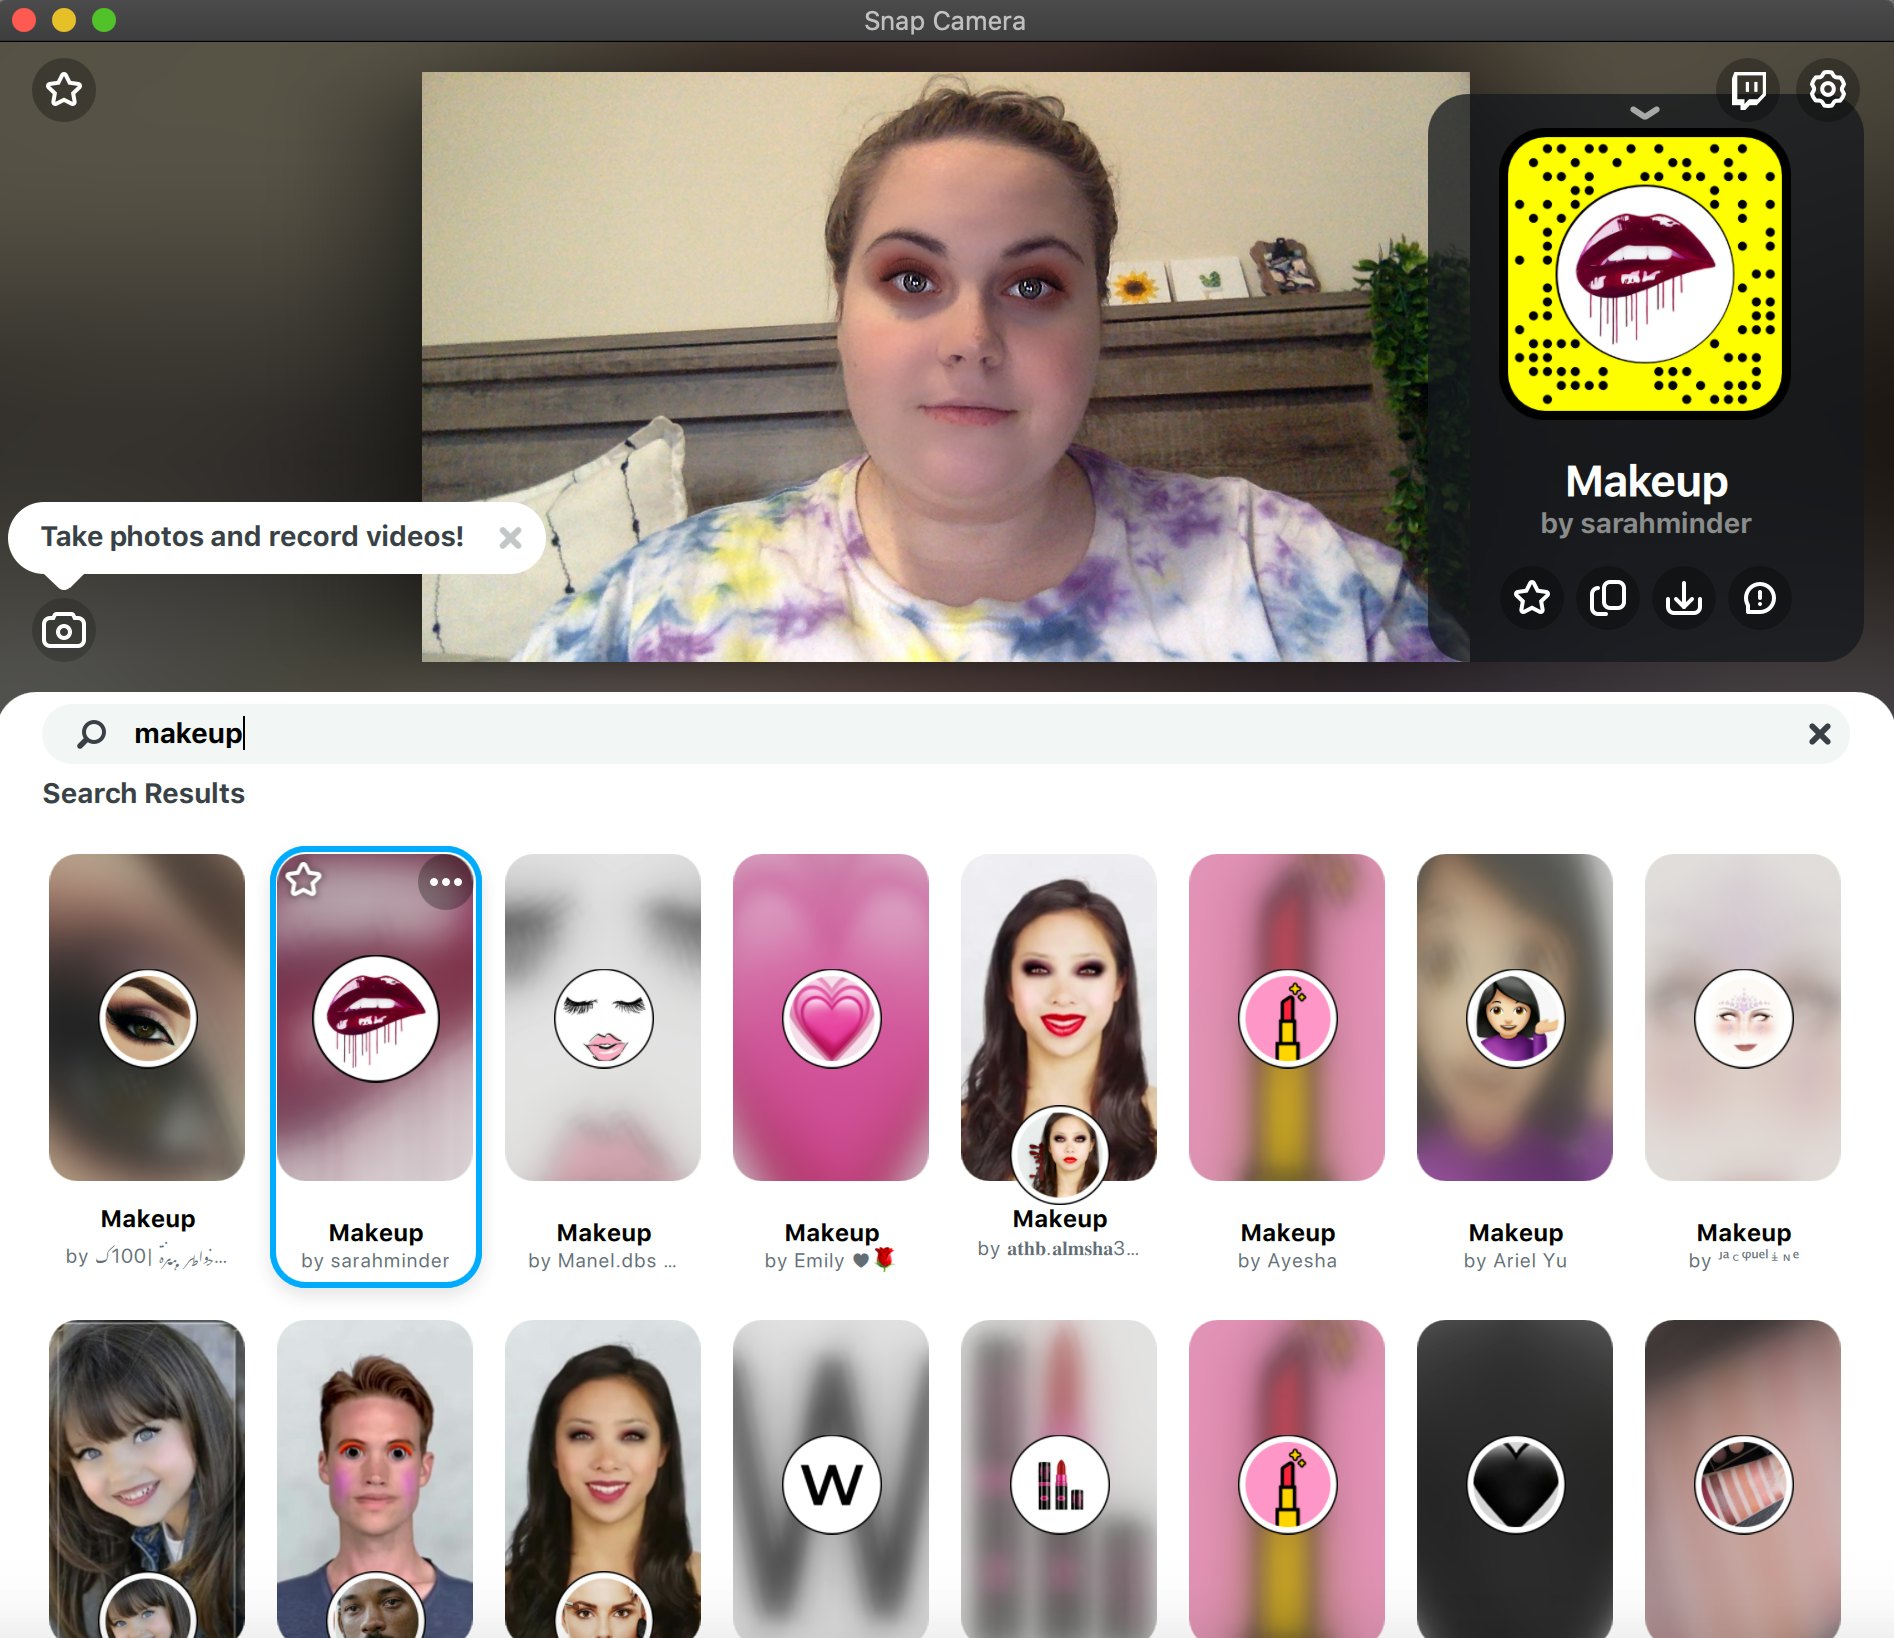 How To Find Snapchat's Snap Camera Beauty Filters To "Do" Your Makeup